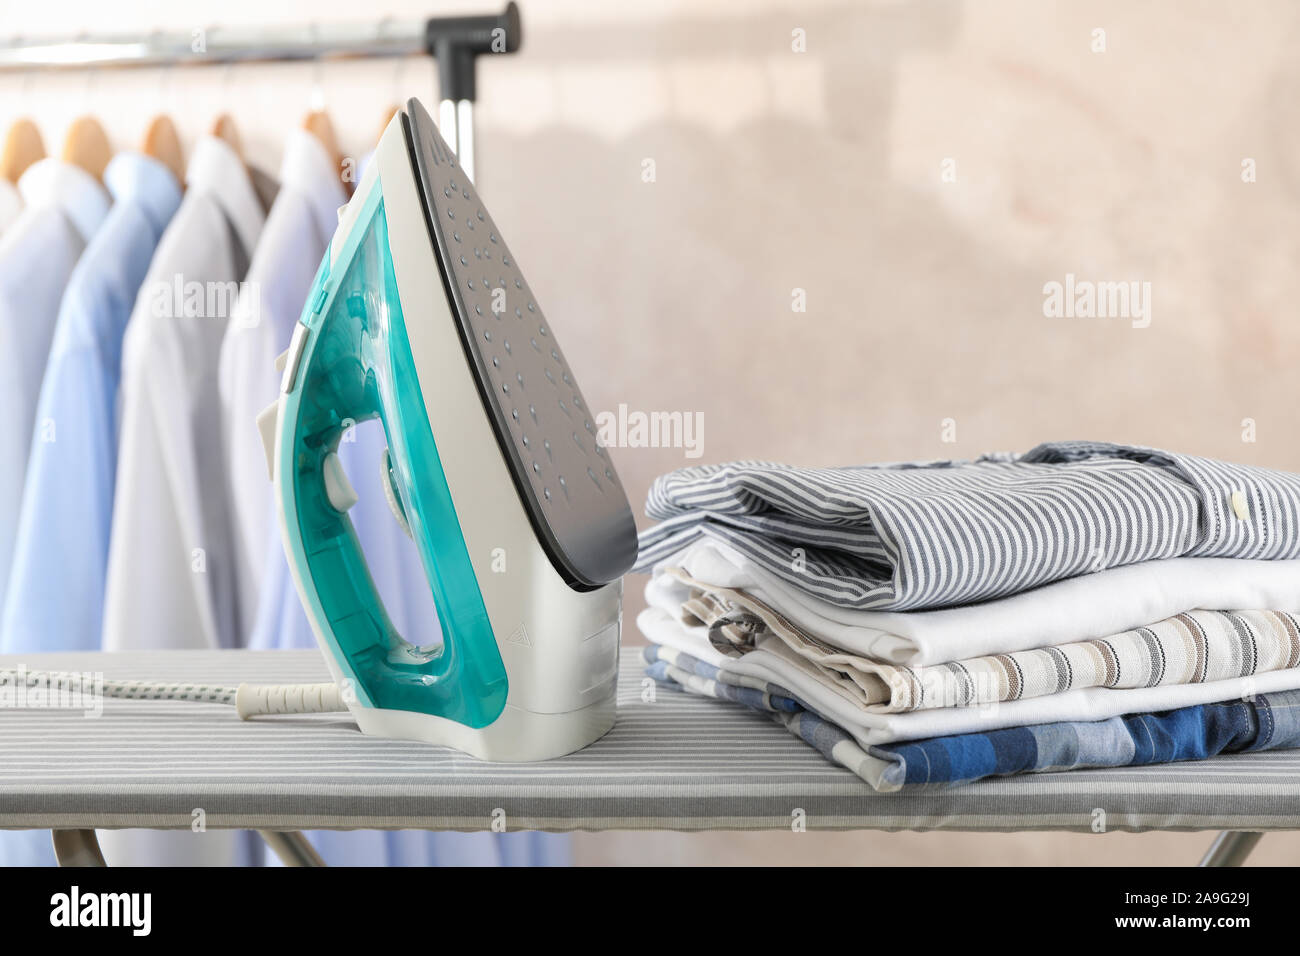 Iron and stack of t-shirts on ironing board, space for text Stock Photo